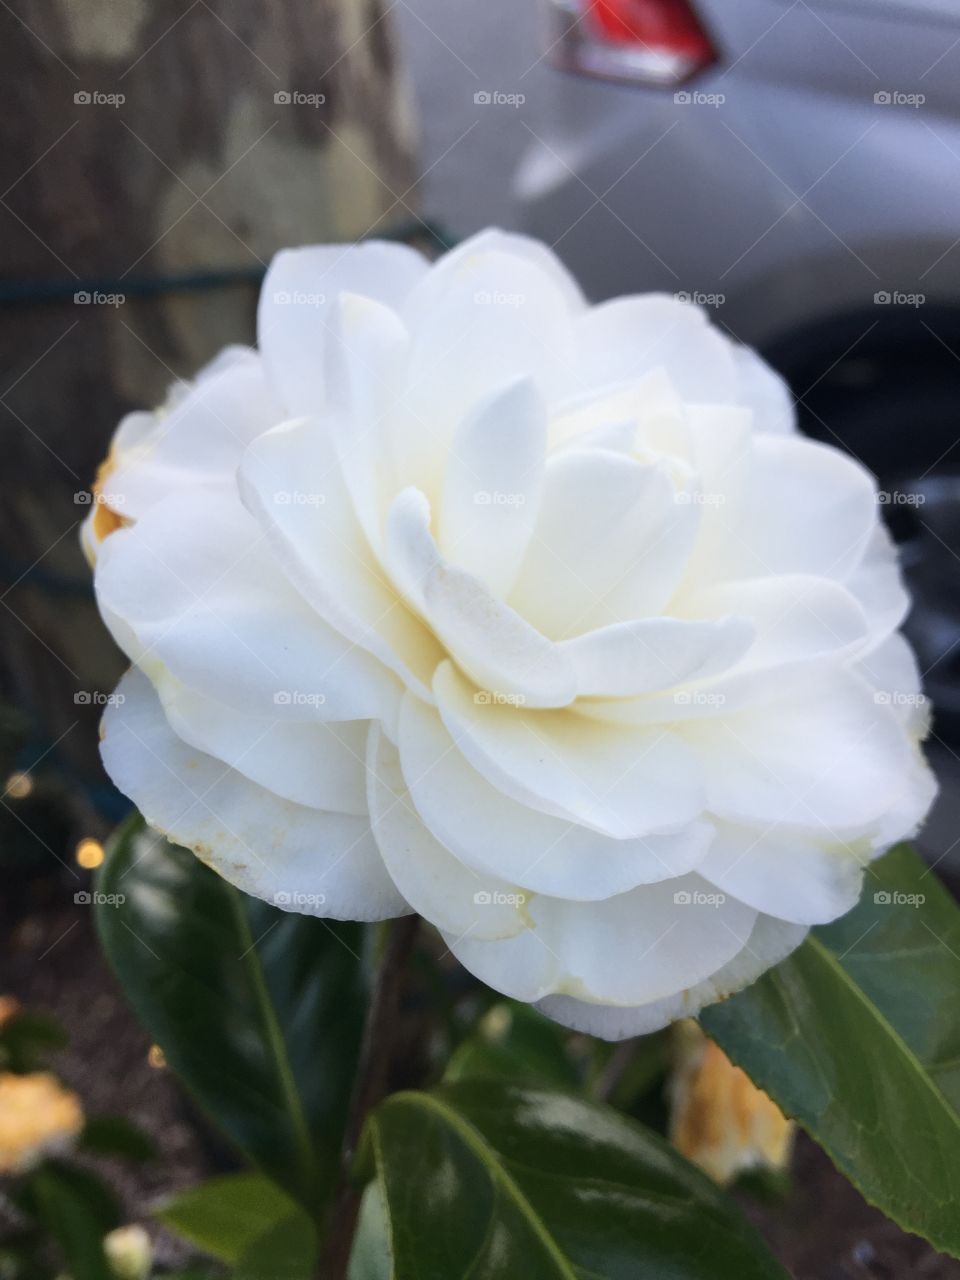 A shot of a fantasy-like white flower humbly set against a landscaping bush.